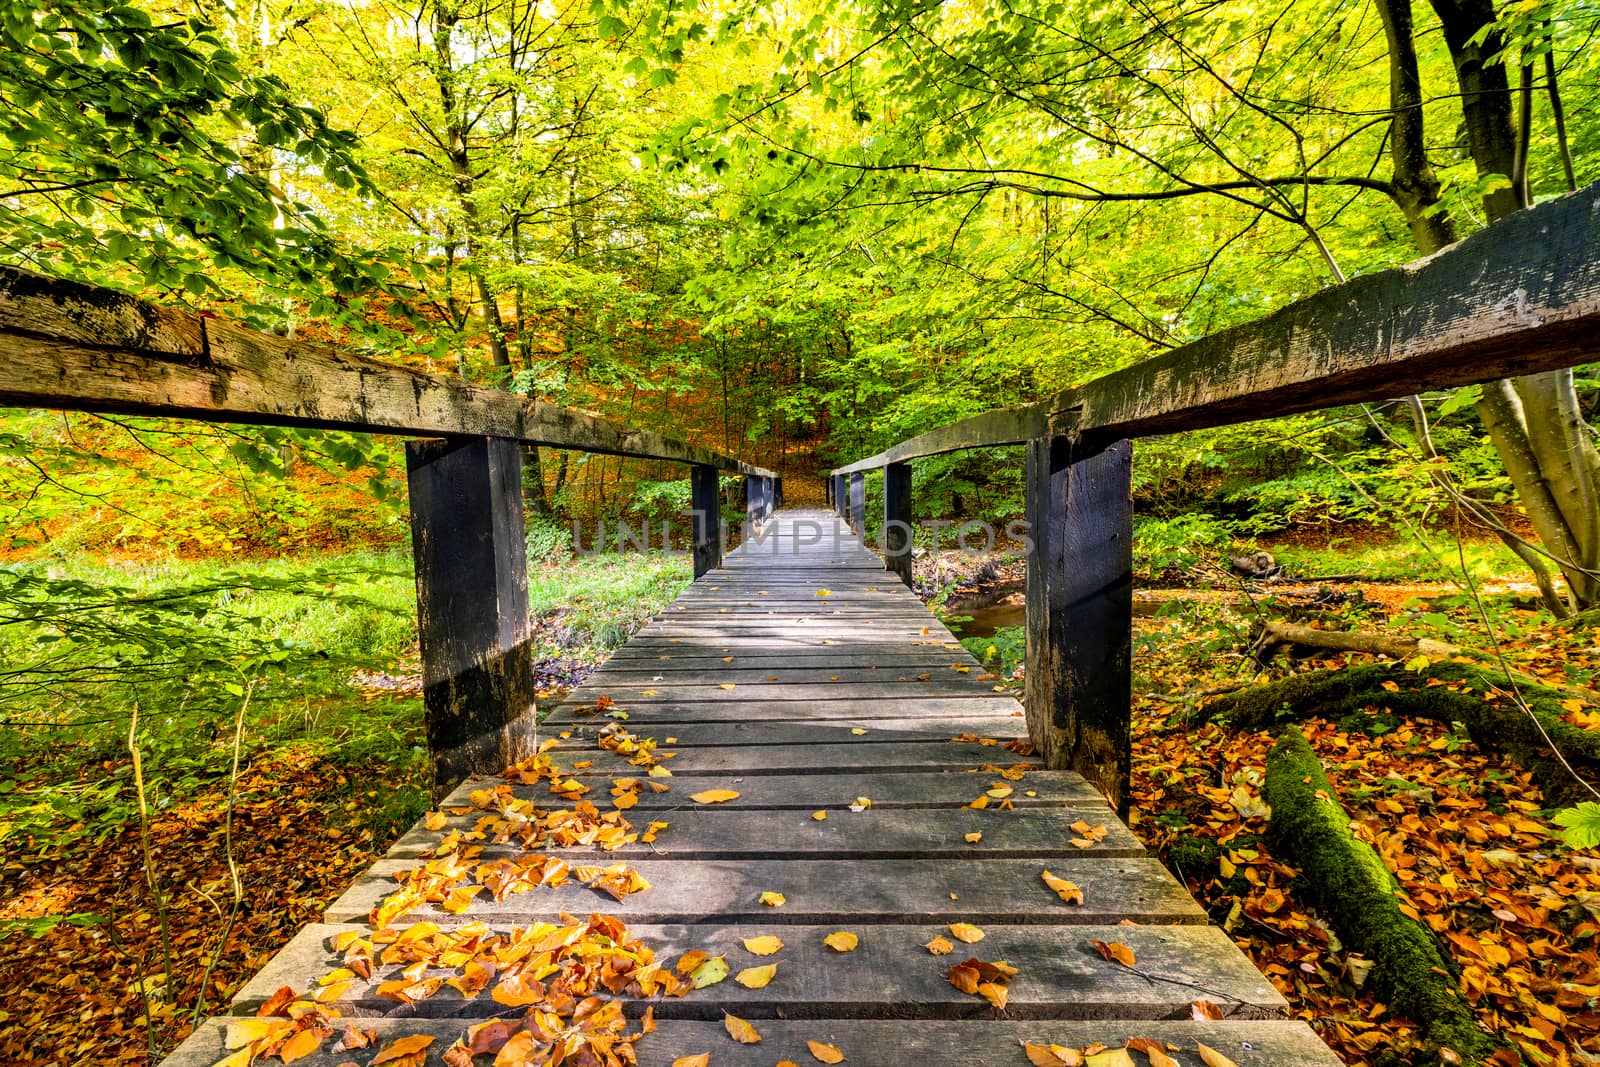 Long wooden bridge in a forest with green trees and autumn leaves